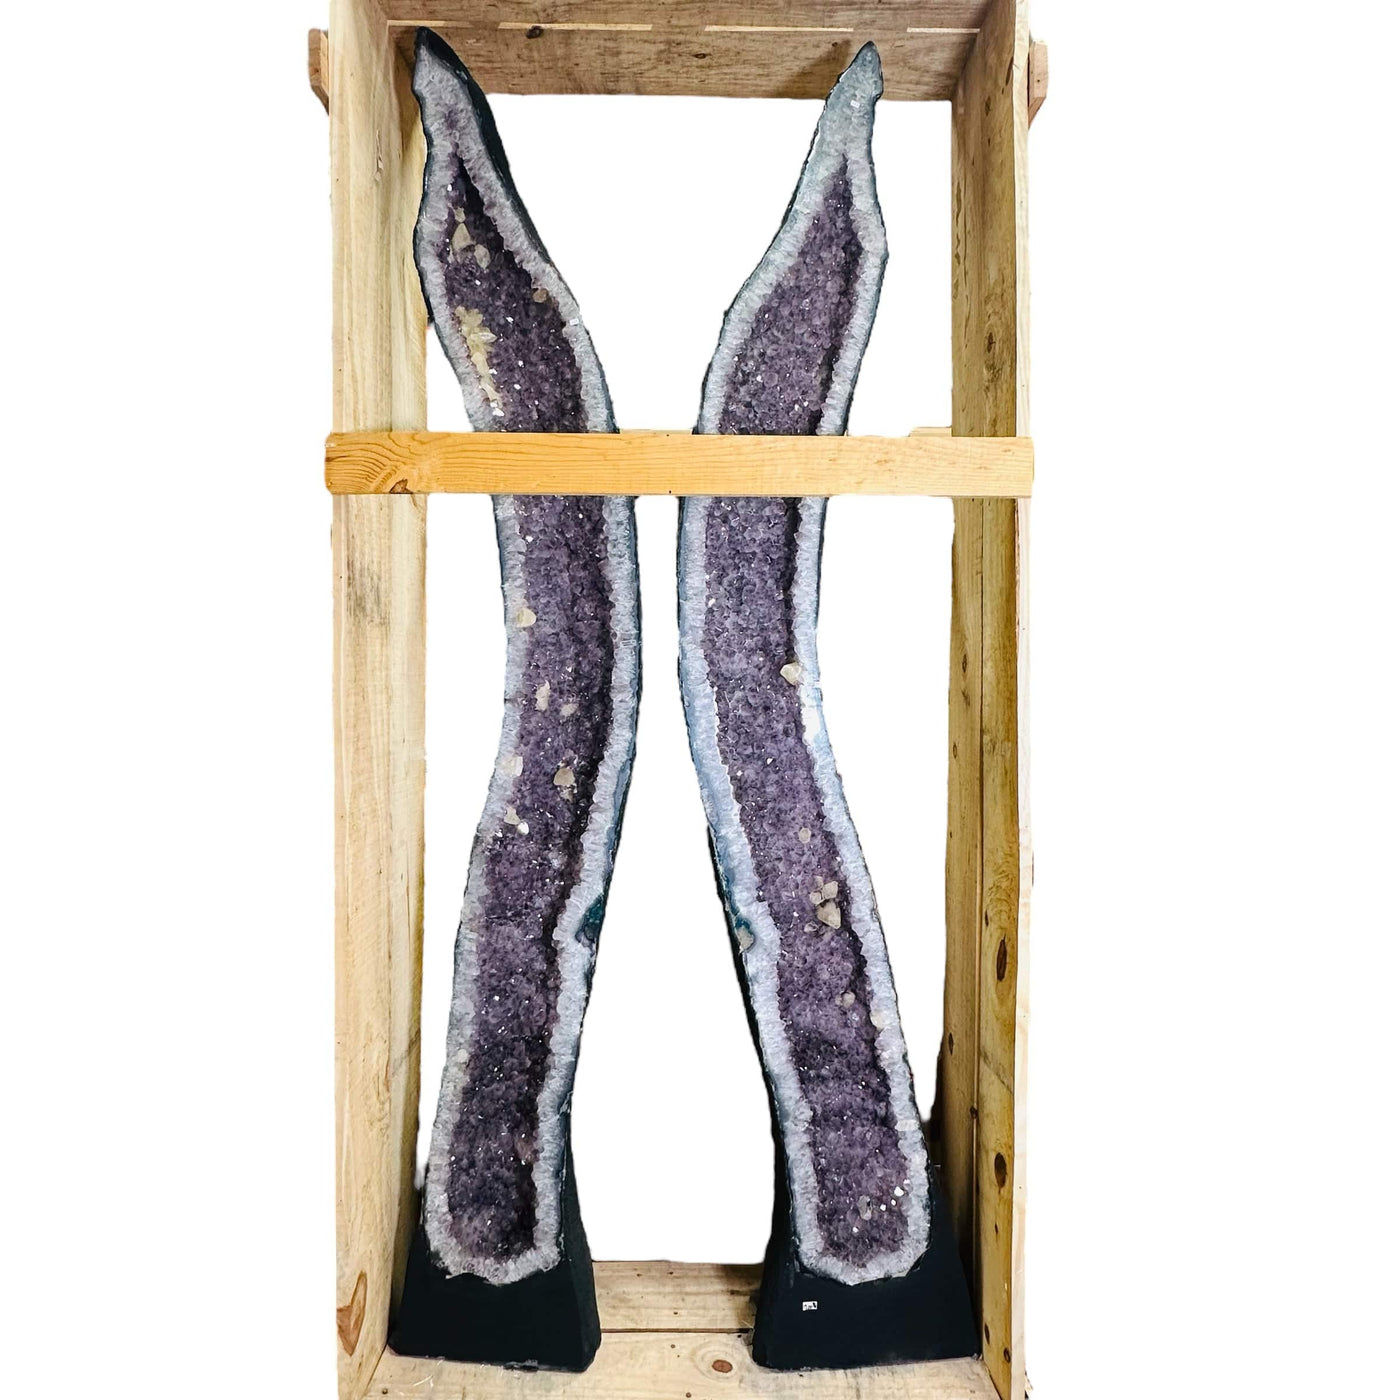 Tall Amethyst Cathedrals can be displayed as home decor 